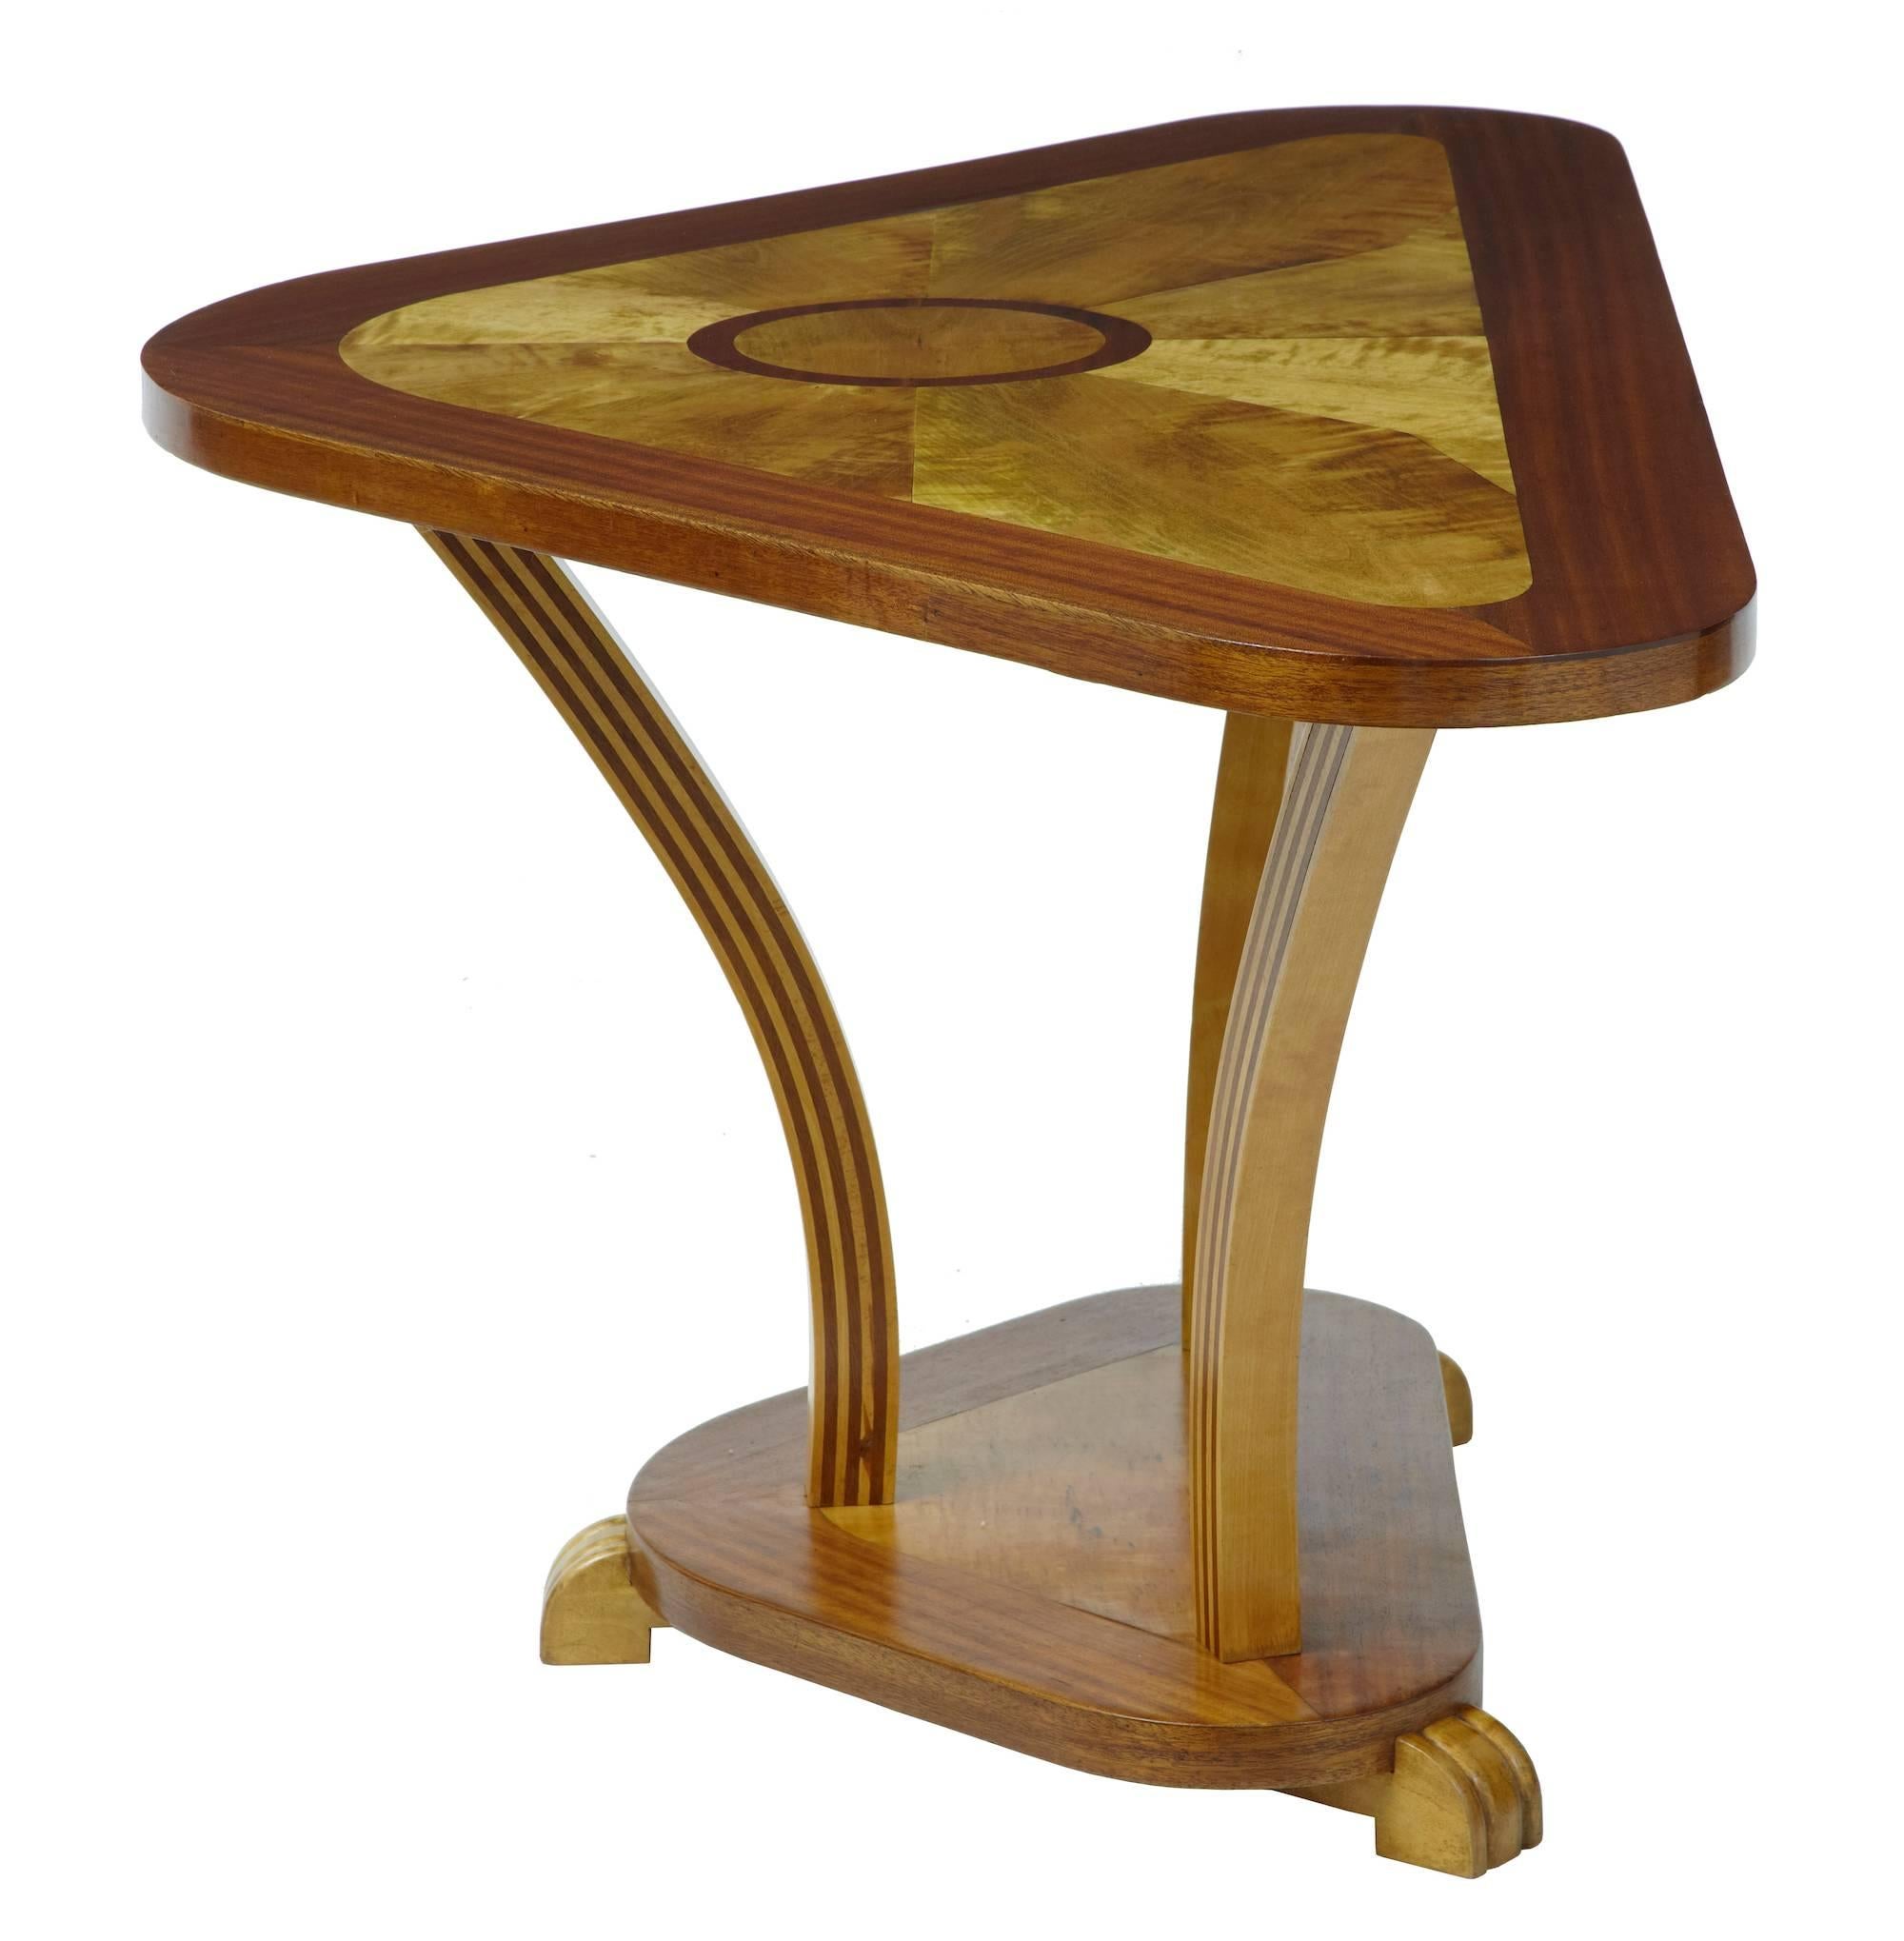 Unusual inlaid shaped console table circa 1920.
Using contrasting mahogany and birch veneers, this table is rich in Art Deco design.
Multi layered shaped legs.

Measure: Height 25 3/4